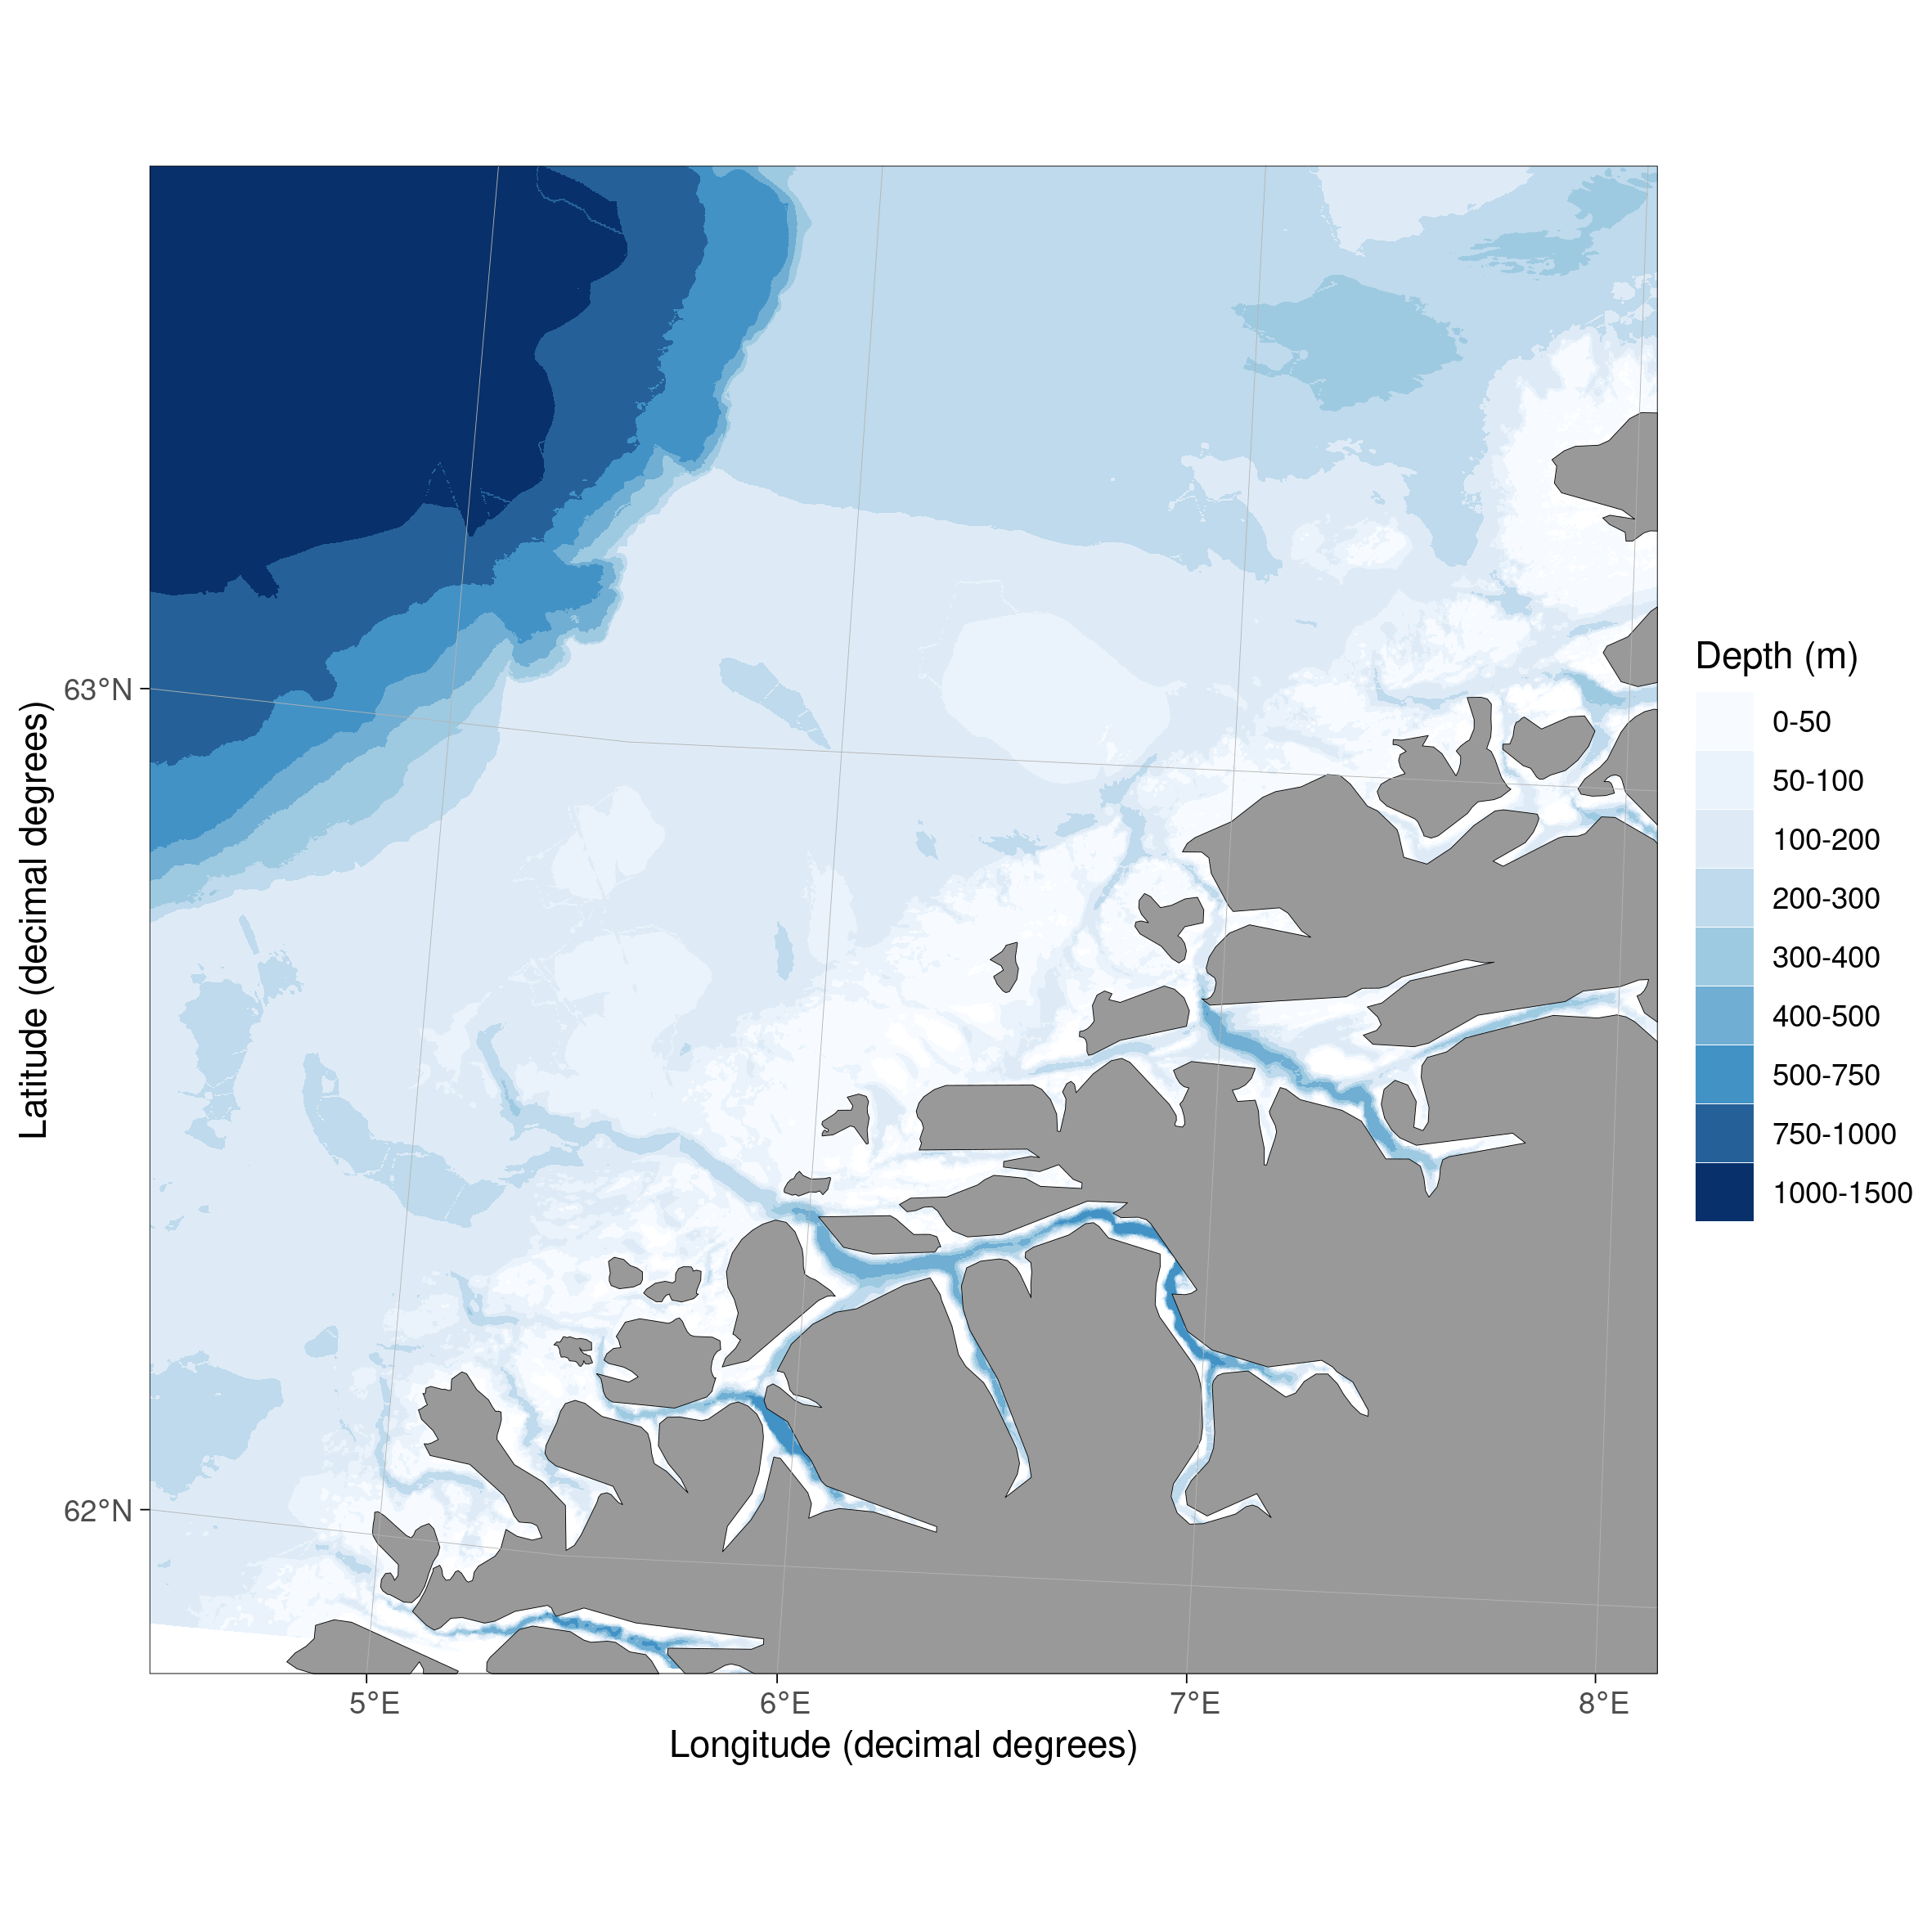 The EMODnet bathymetry is still unfinished. Here a map showing a part of the Norwegian coast around Ålesund for testing. Vectorization of land shapes from bathymetry has not been implemented yet.